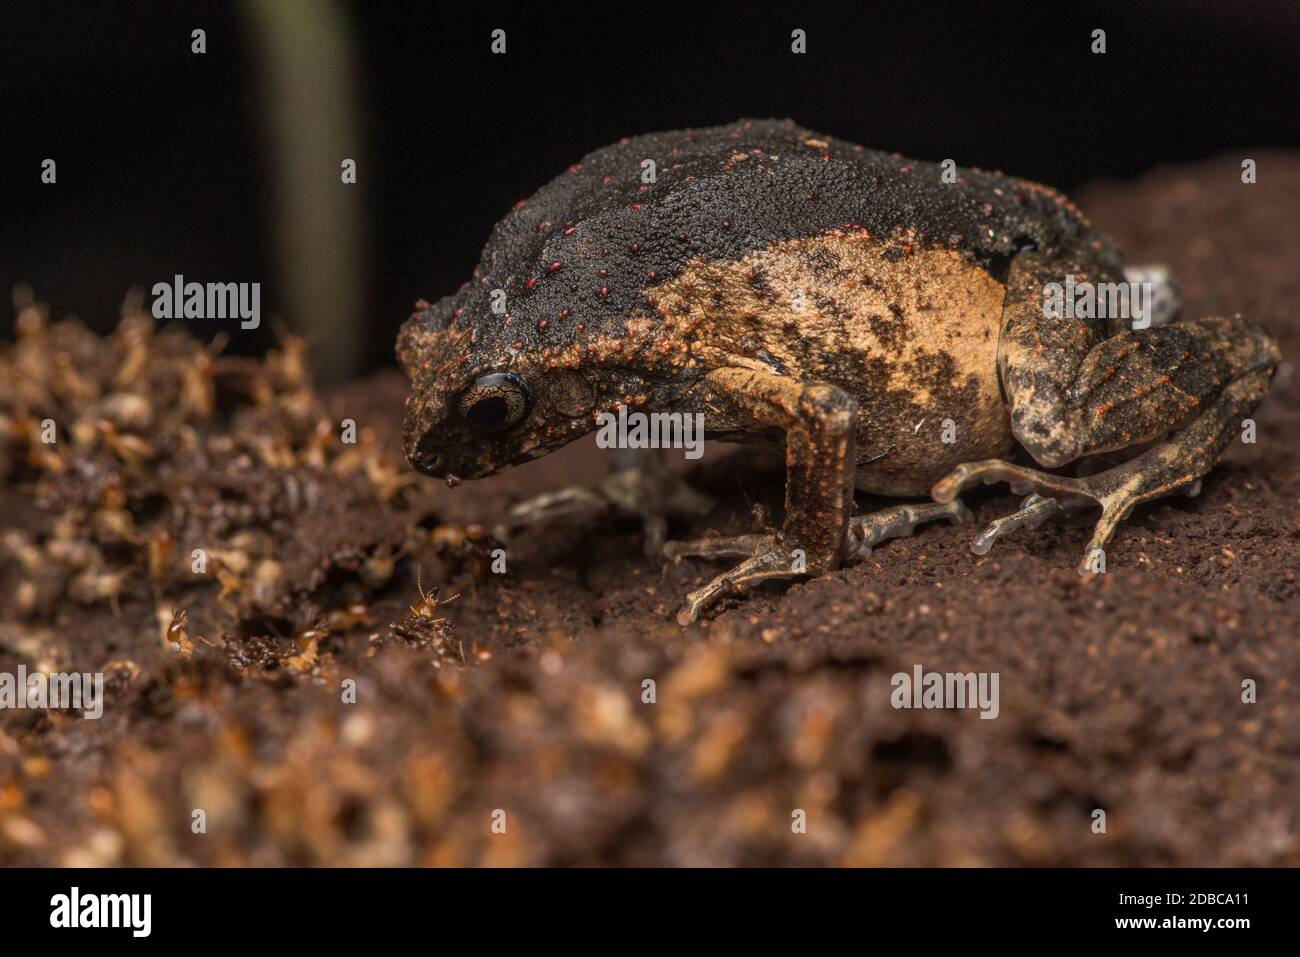 A peters dwarf frog (Engystomops petersi) sitting ontop of a termite nest hunting the termites in Yasuni National Park, Ecuador. Stock Photo